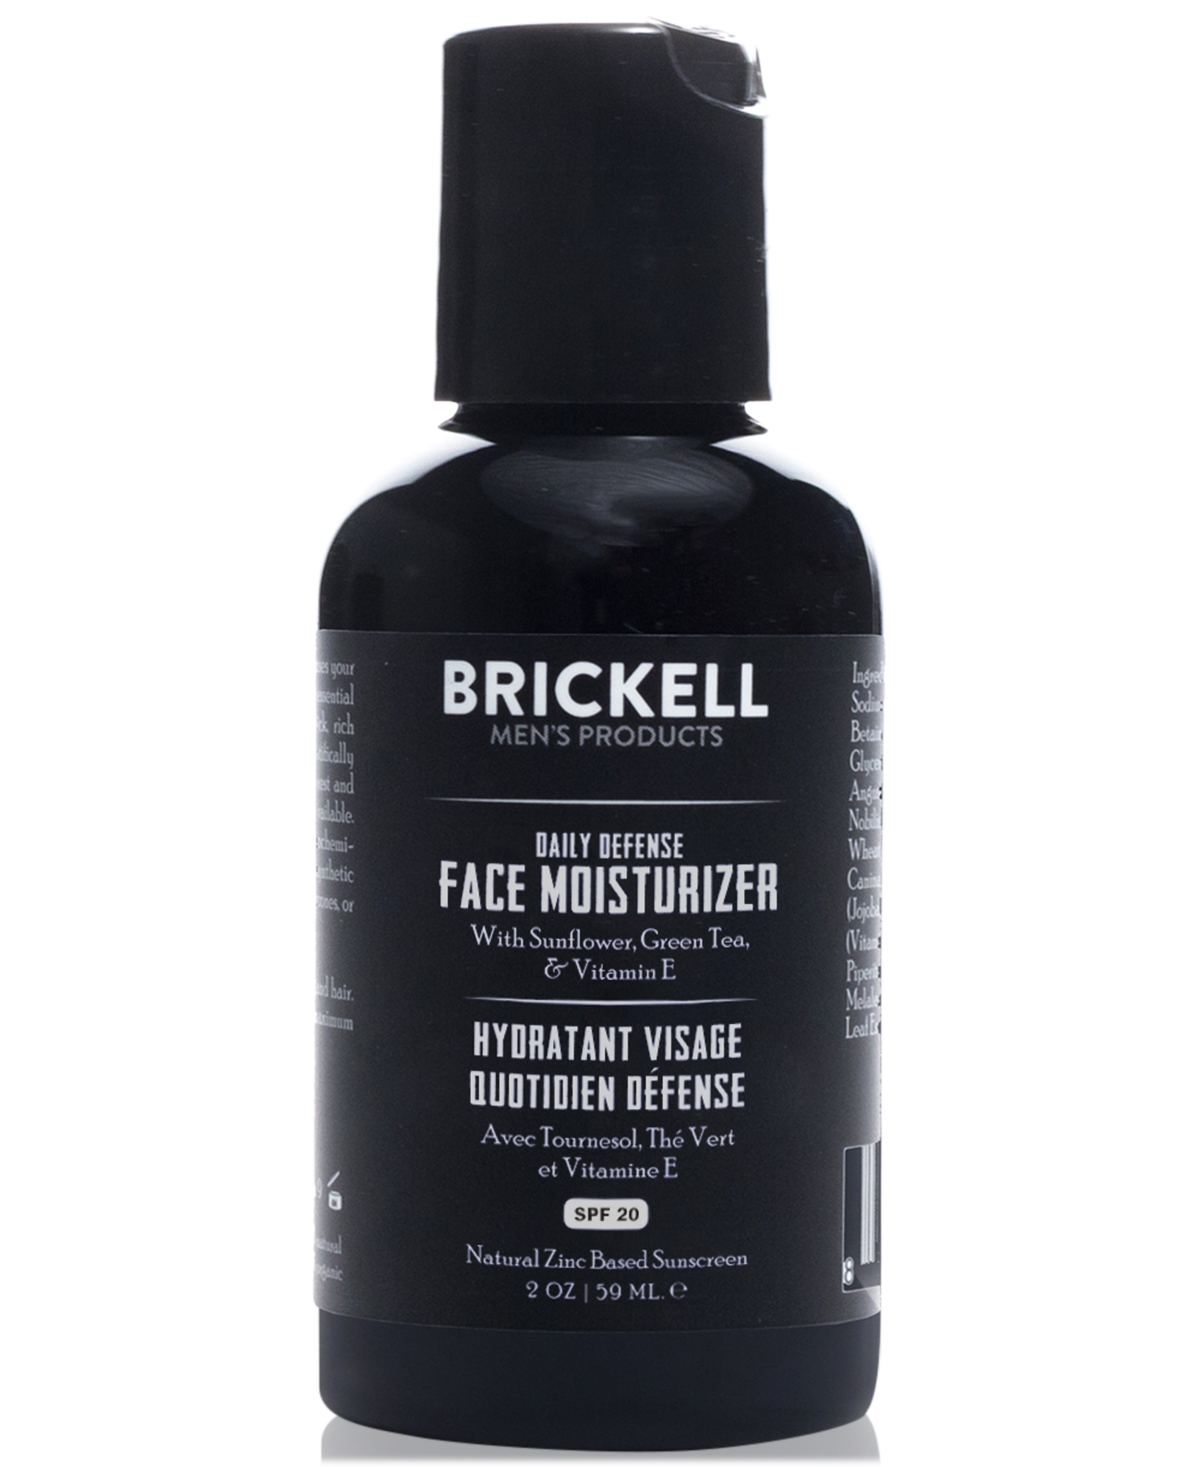 Brickell Mens Products Brickell Men's Products Daily Defense Face Moisturizer Spf 20, 2 Oz.